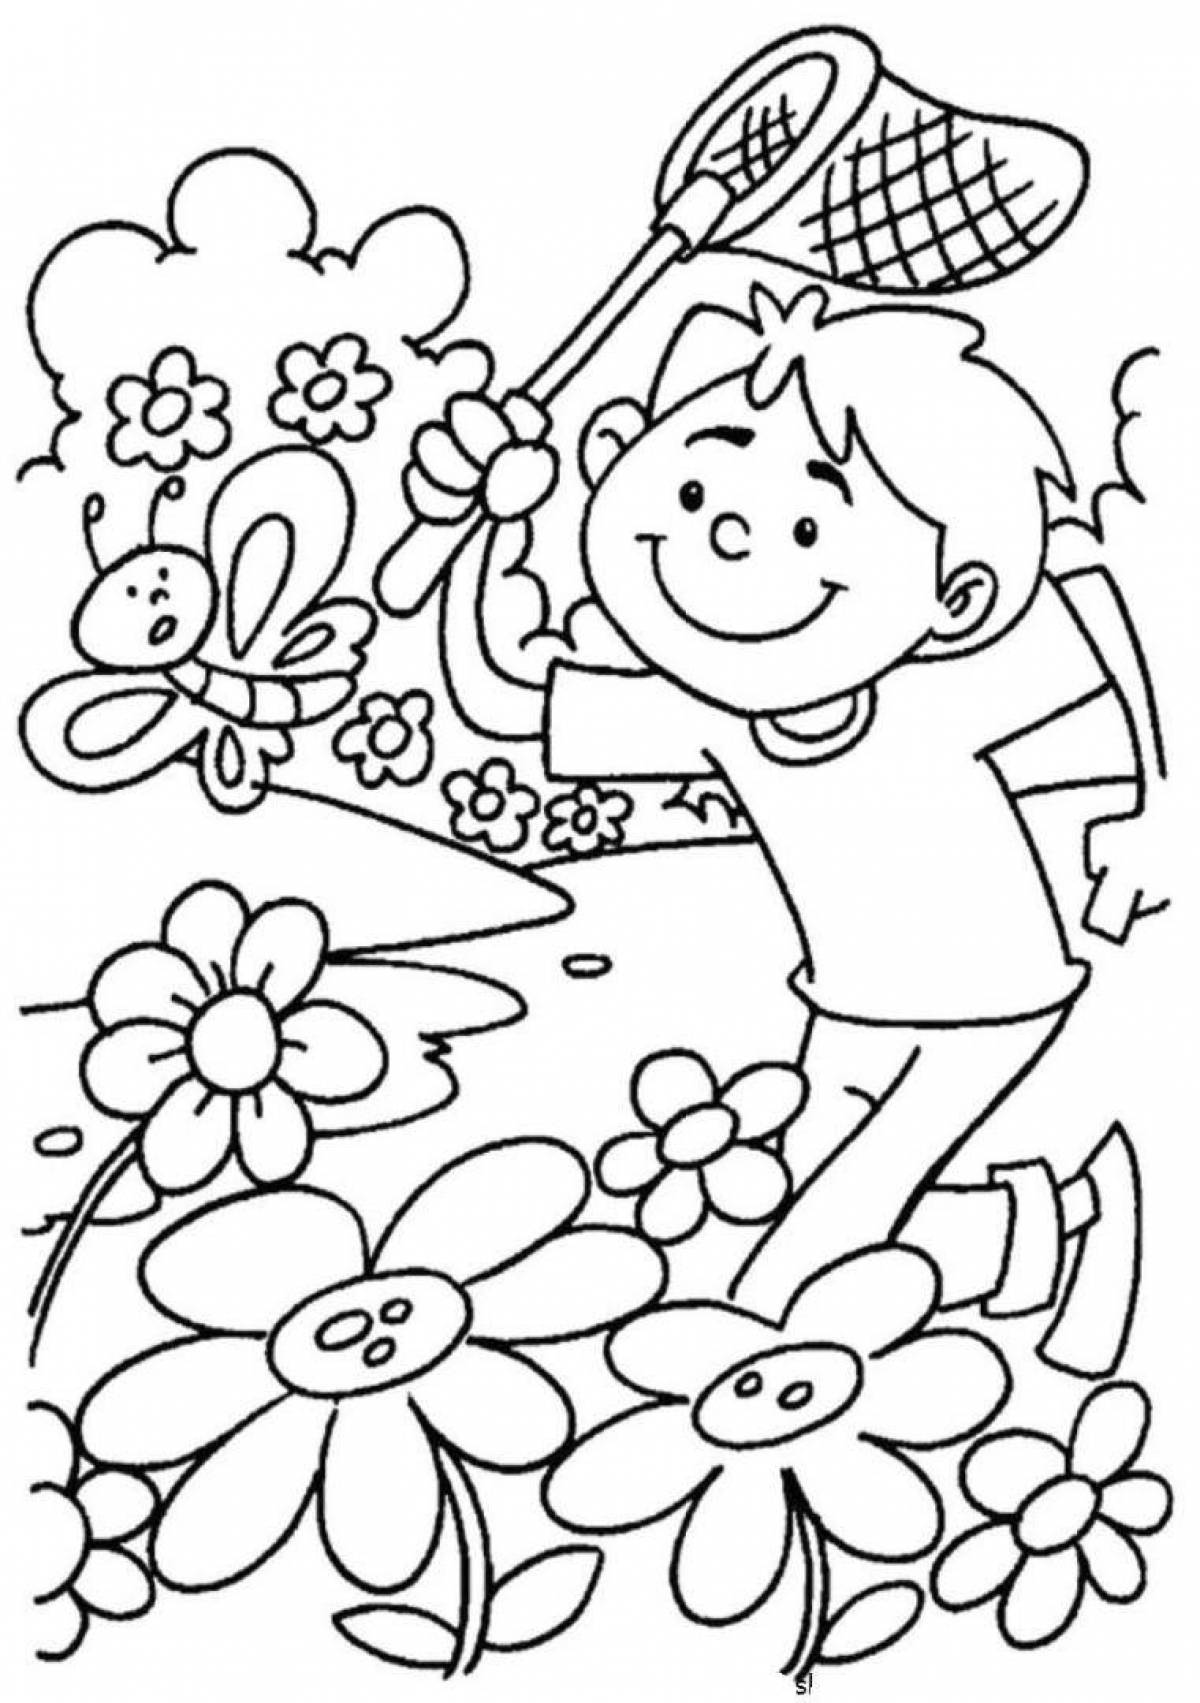 Stormy summer coloring book